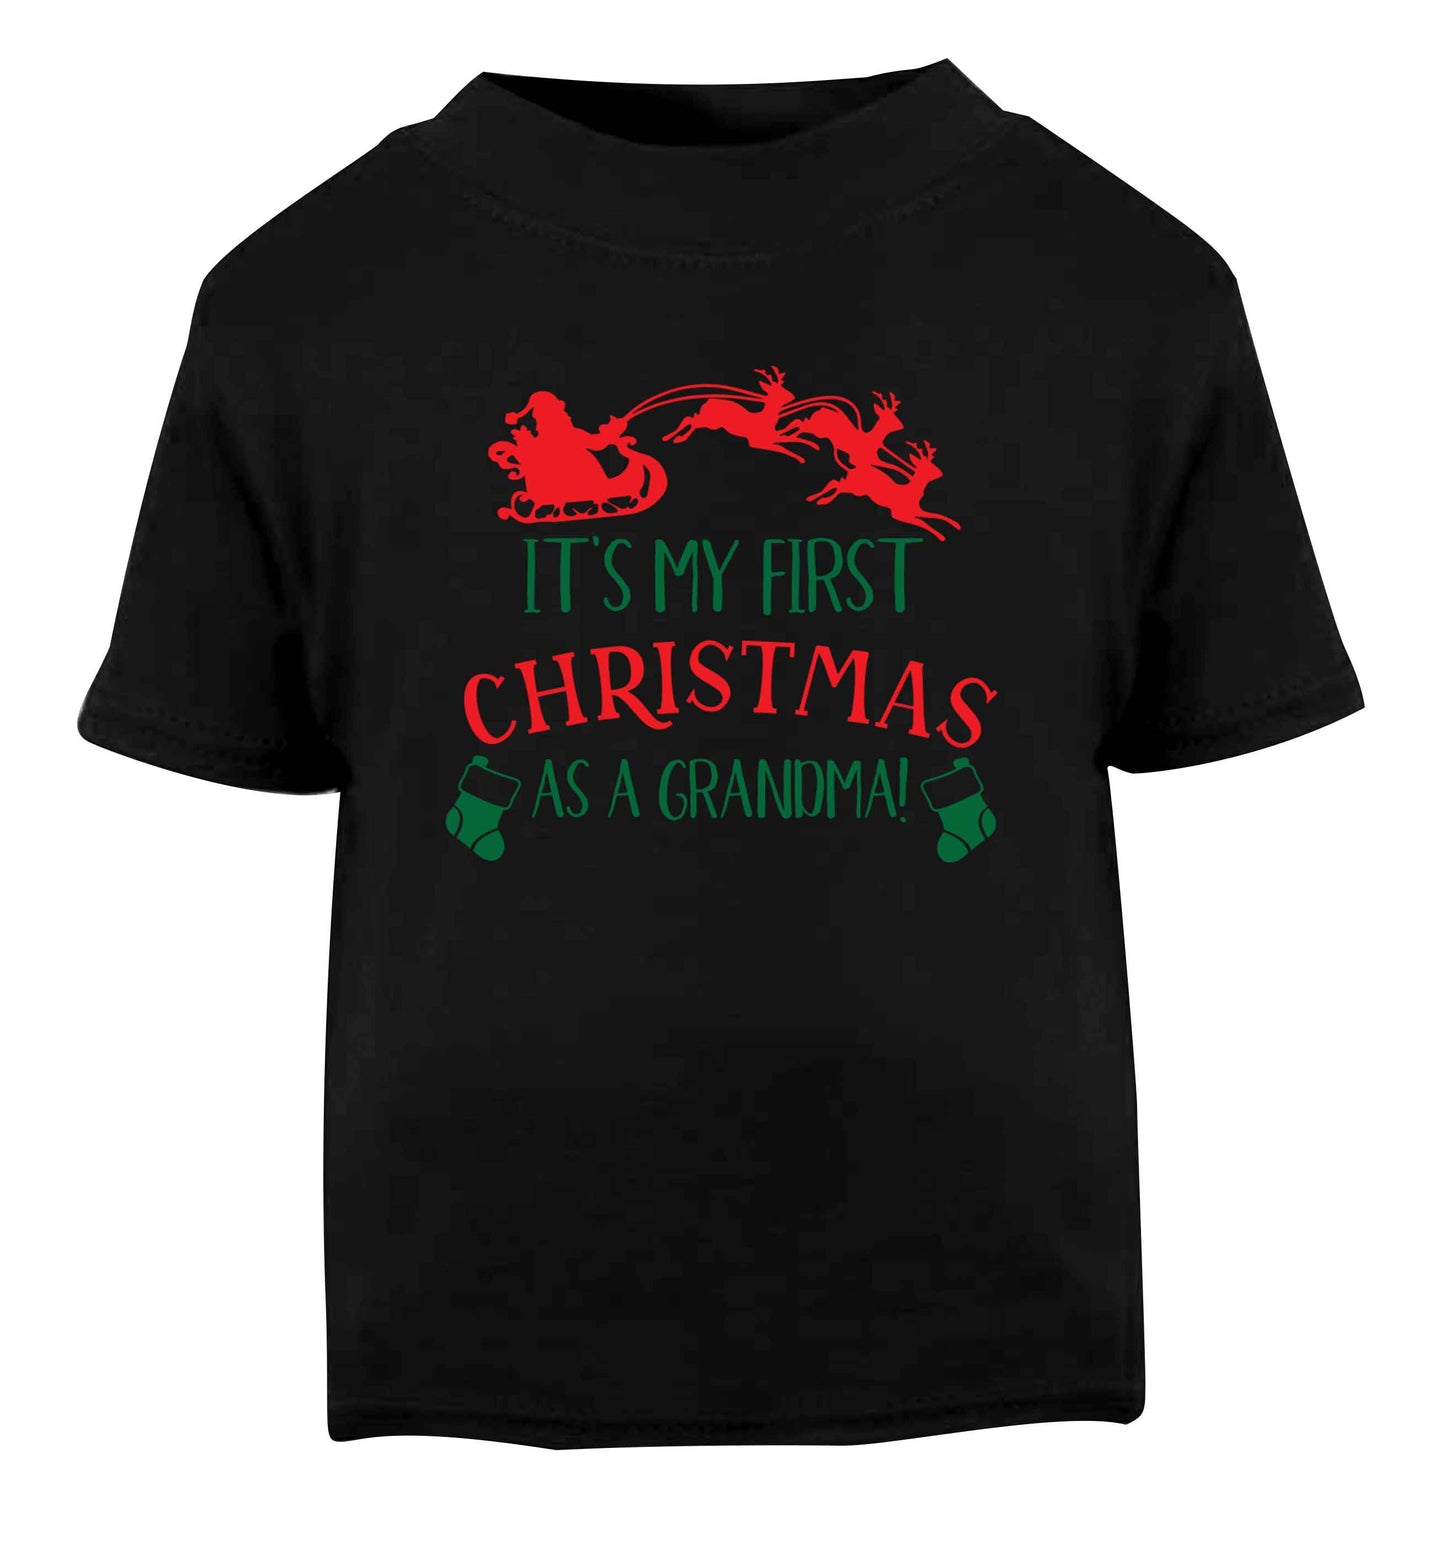 It's my first Christmas as a grandma! Black Baby Toddler Tshirt 2 years